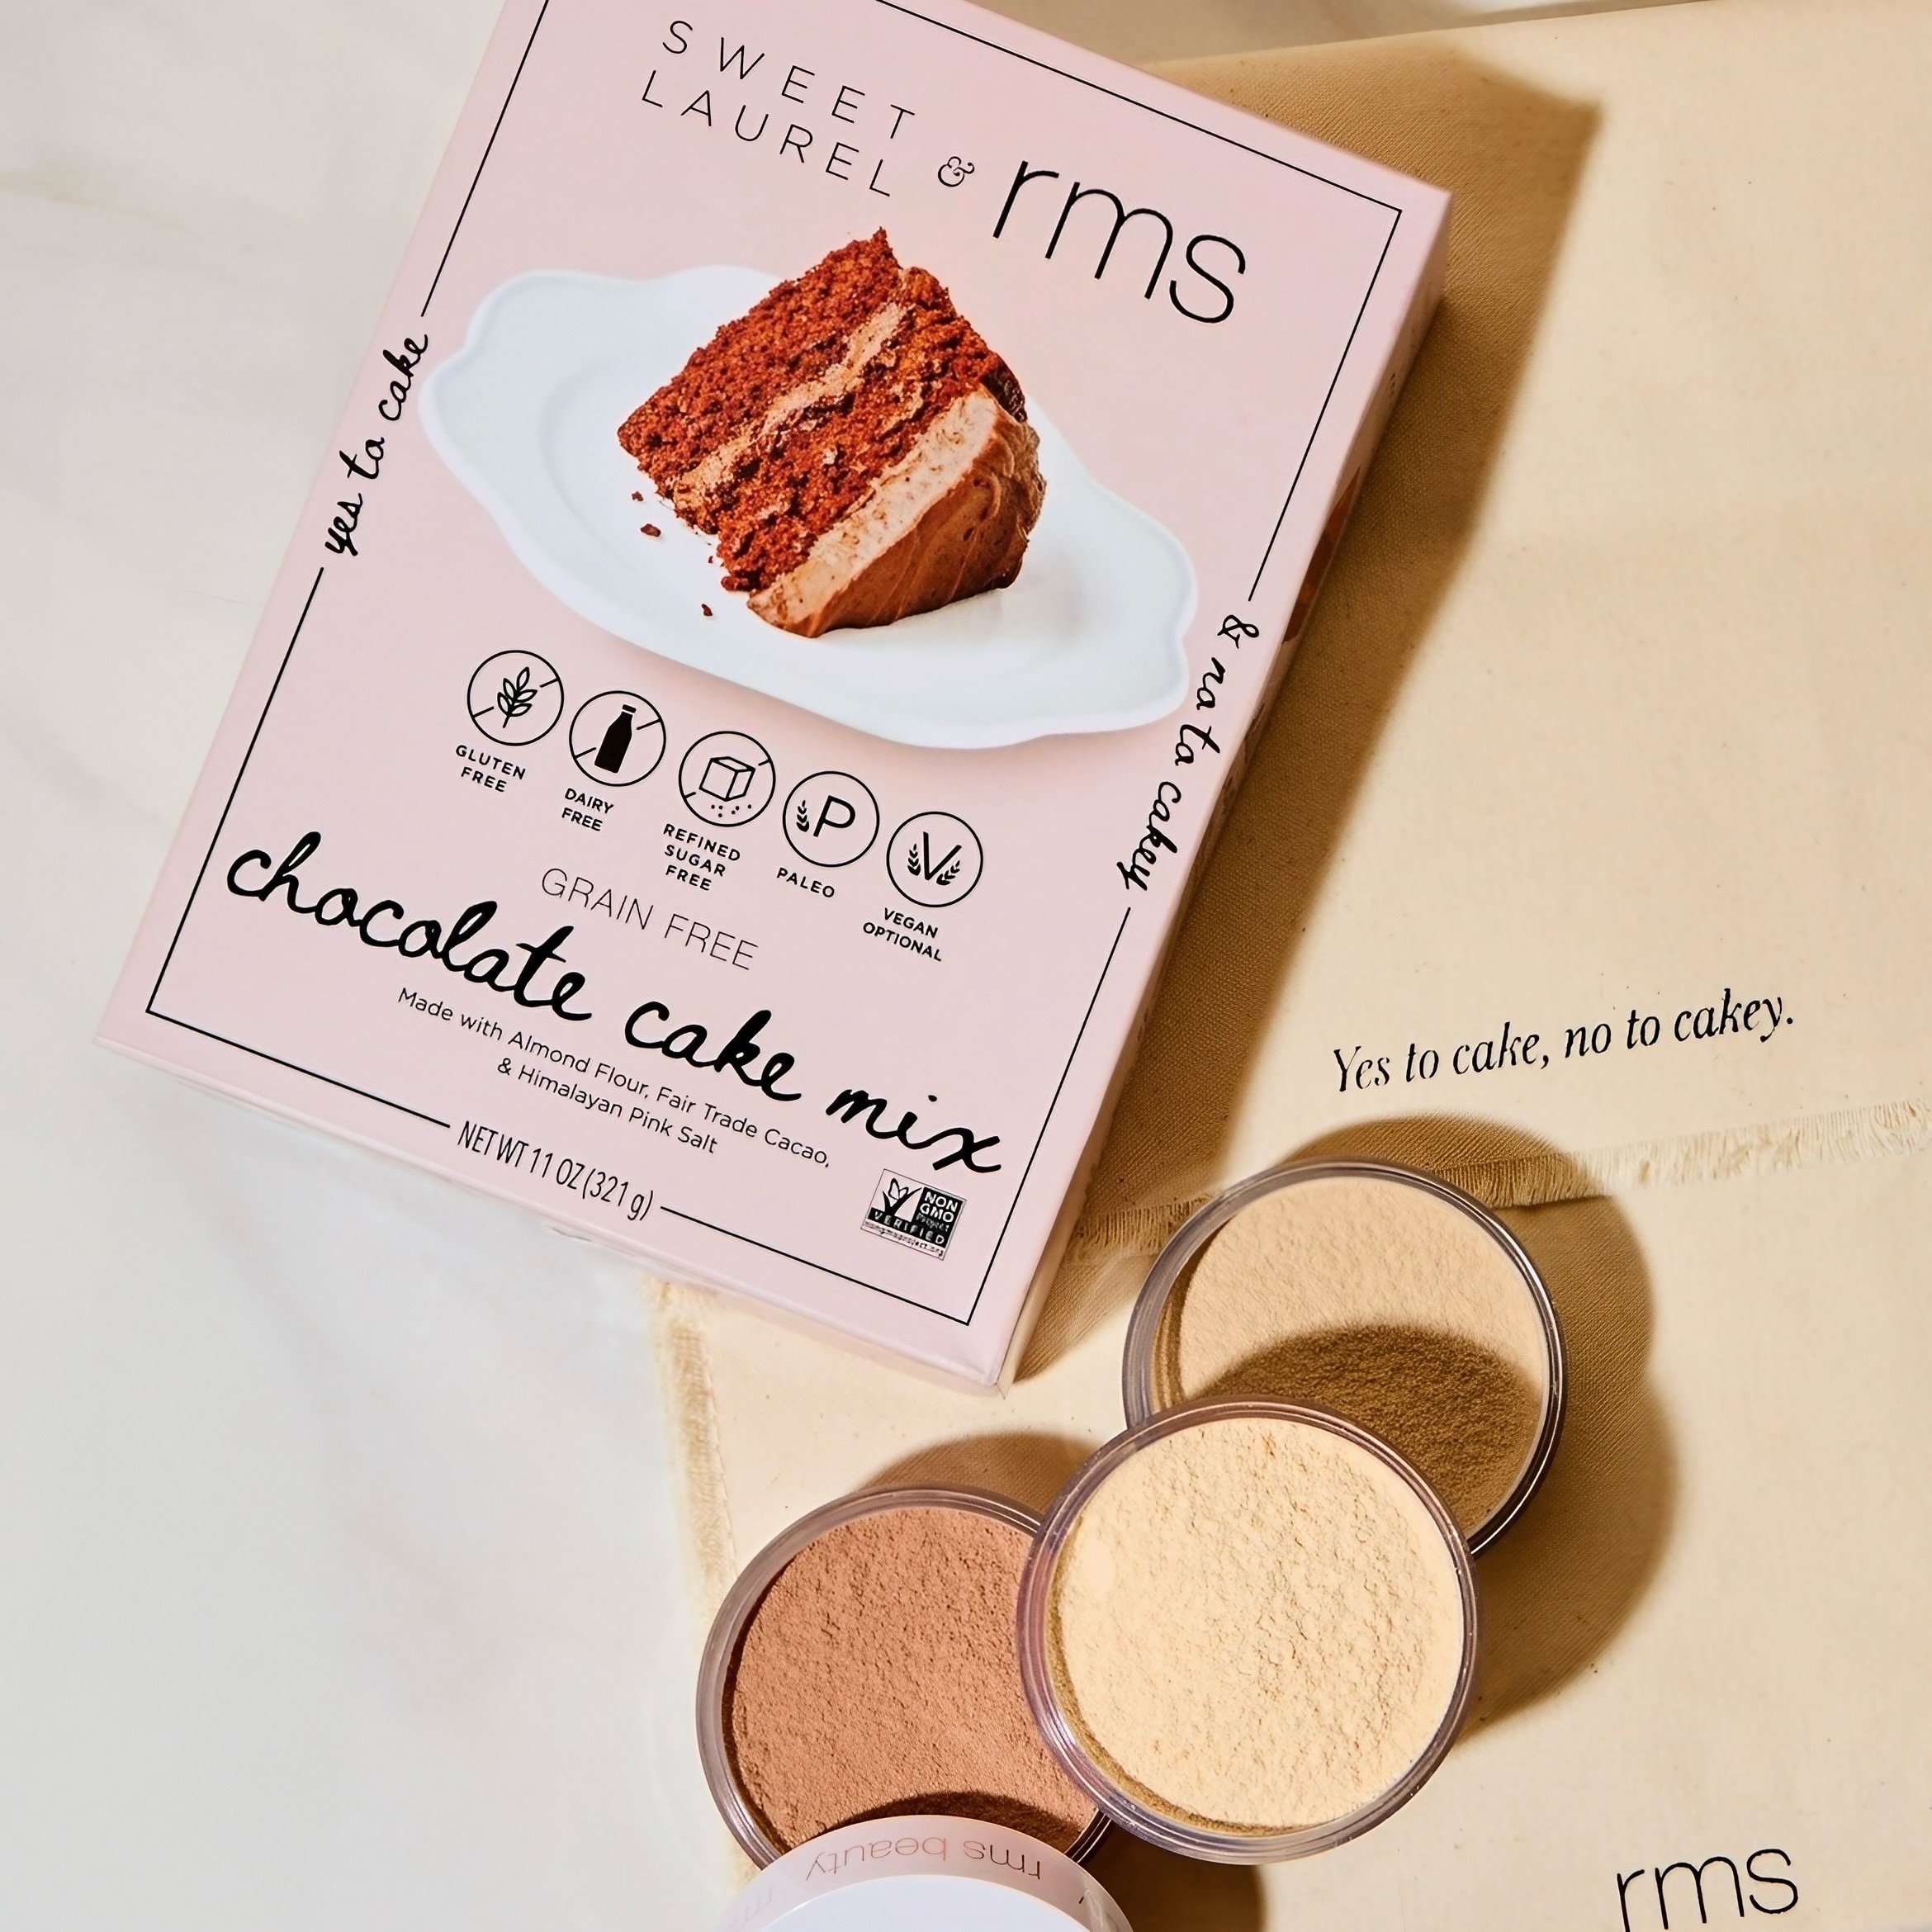 Sweet Laurel Bakery and RMS Beauty Team Up For Sweetest Collaboration Yet